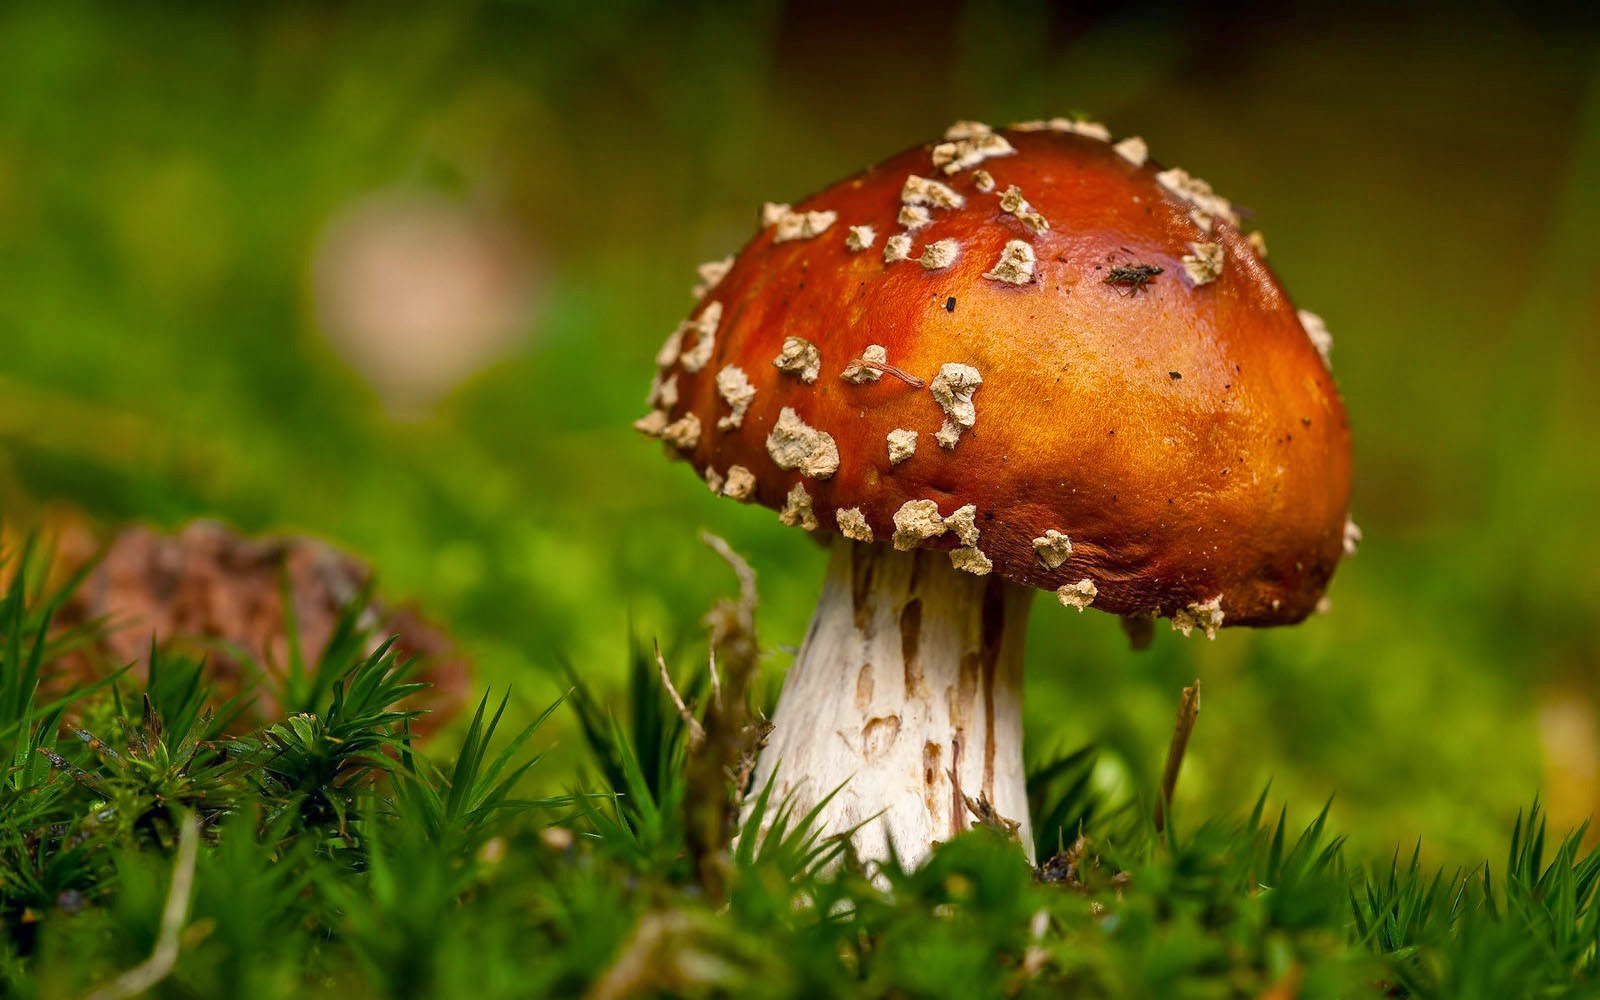 Tag Mushrooms Wallpaper Background Photos Image Andpictures For